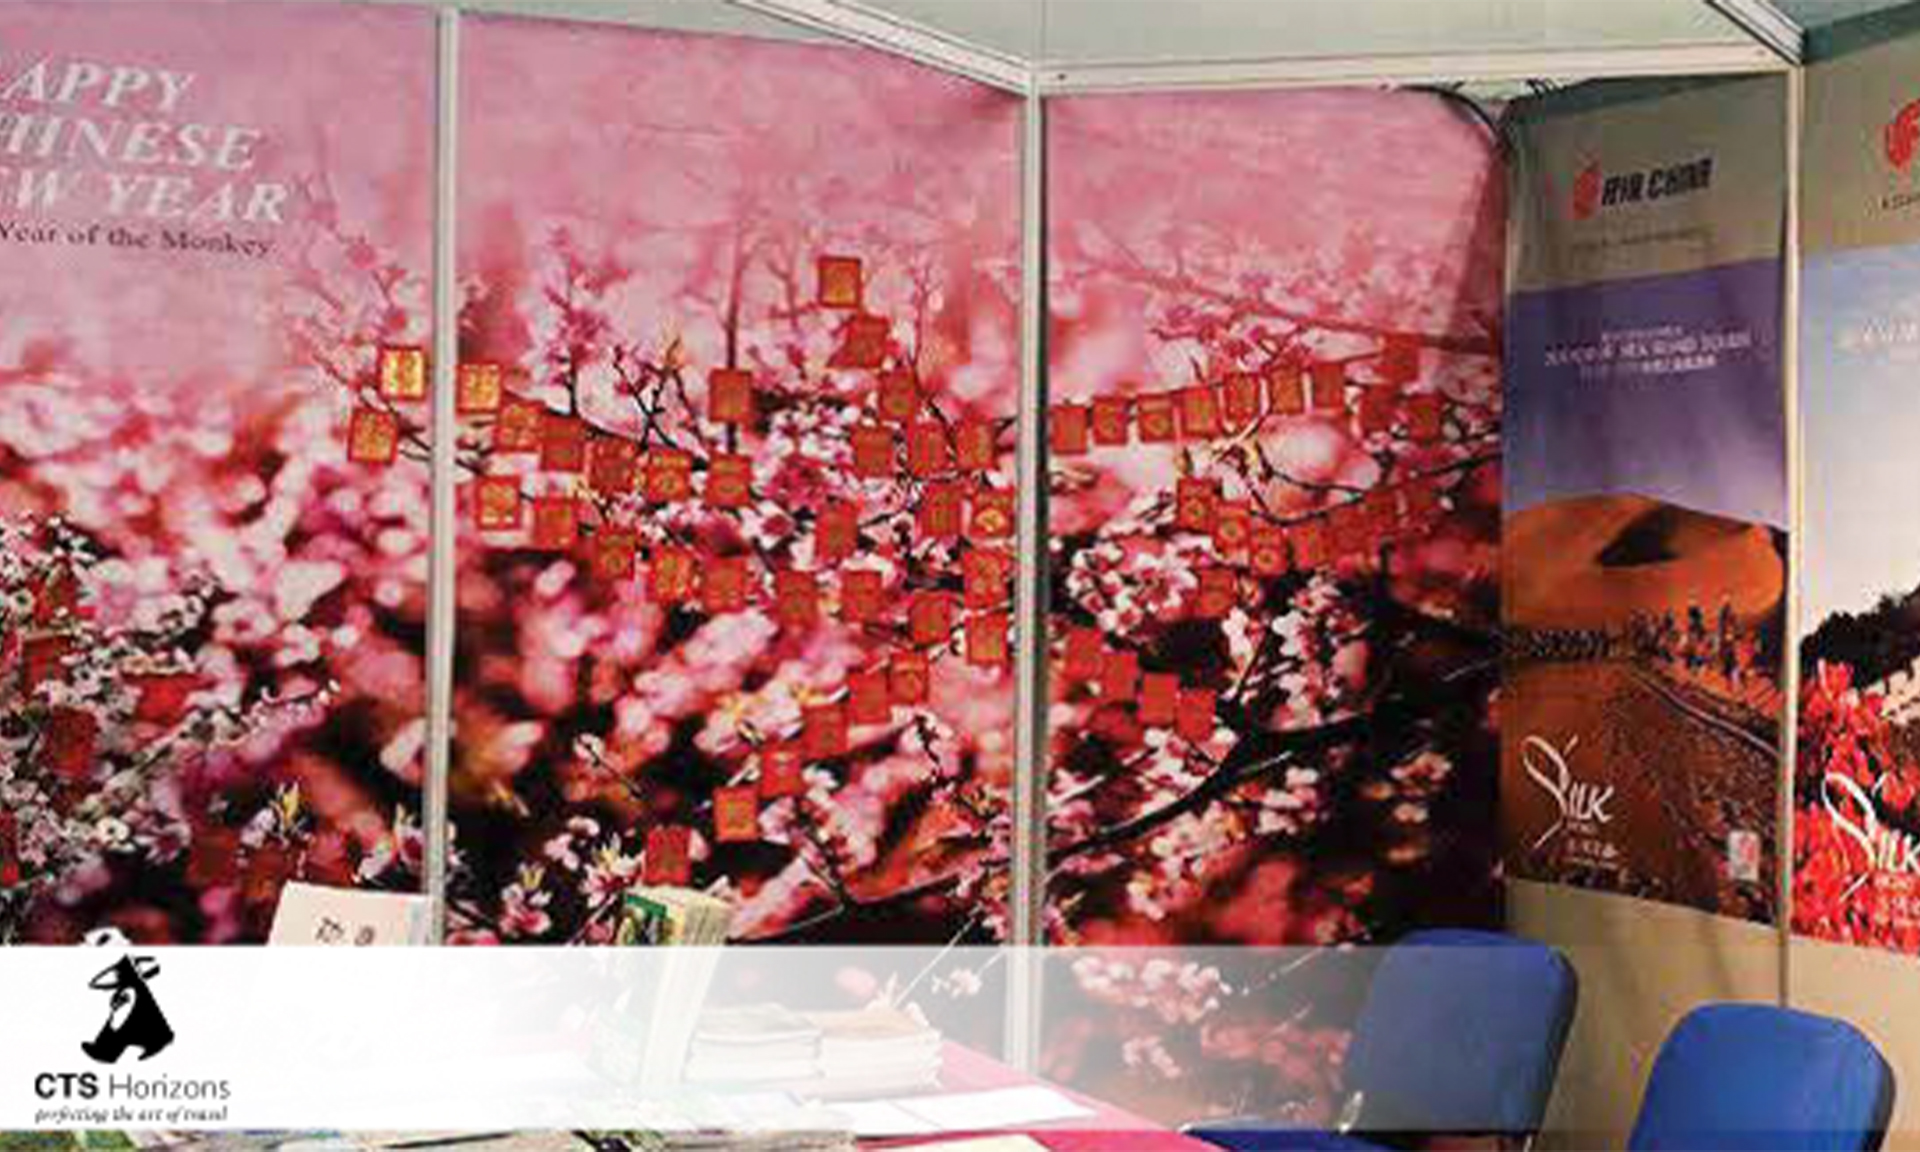 Exhibiting with Flexi-banners - CTS Horizons